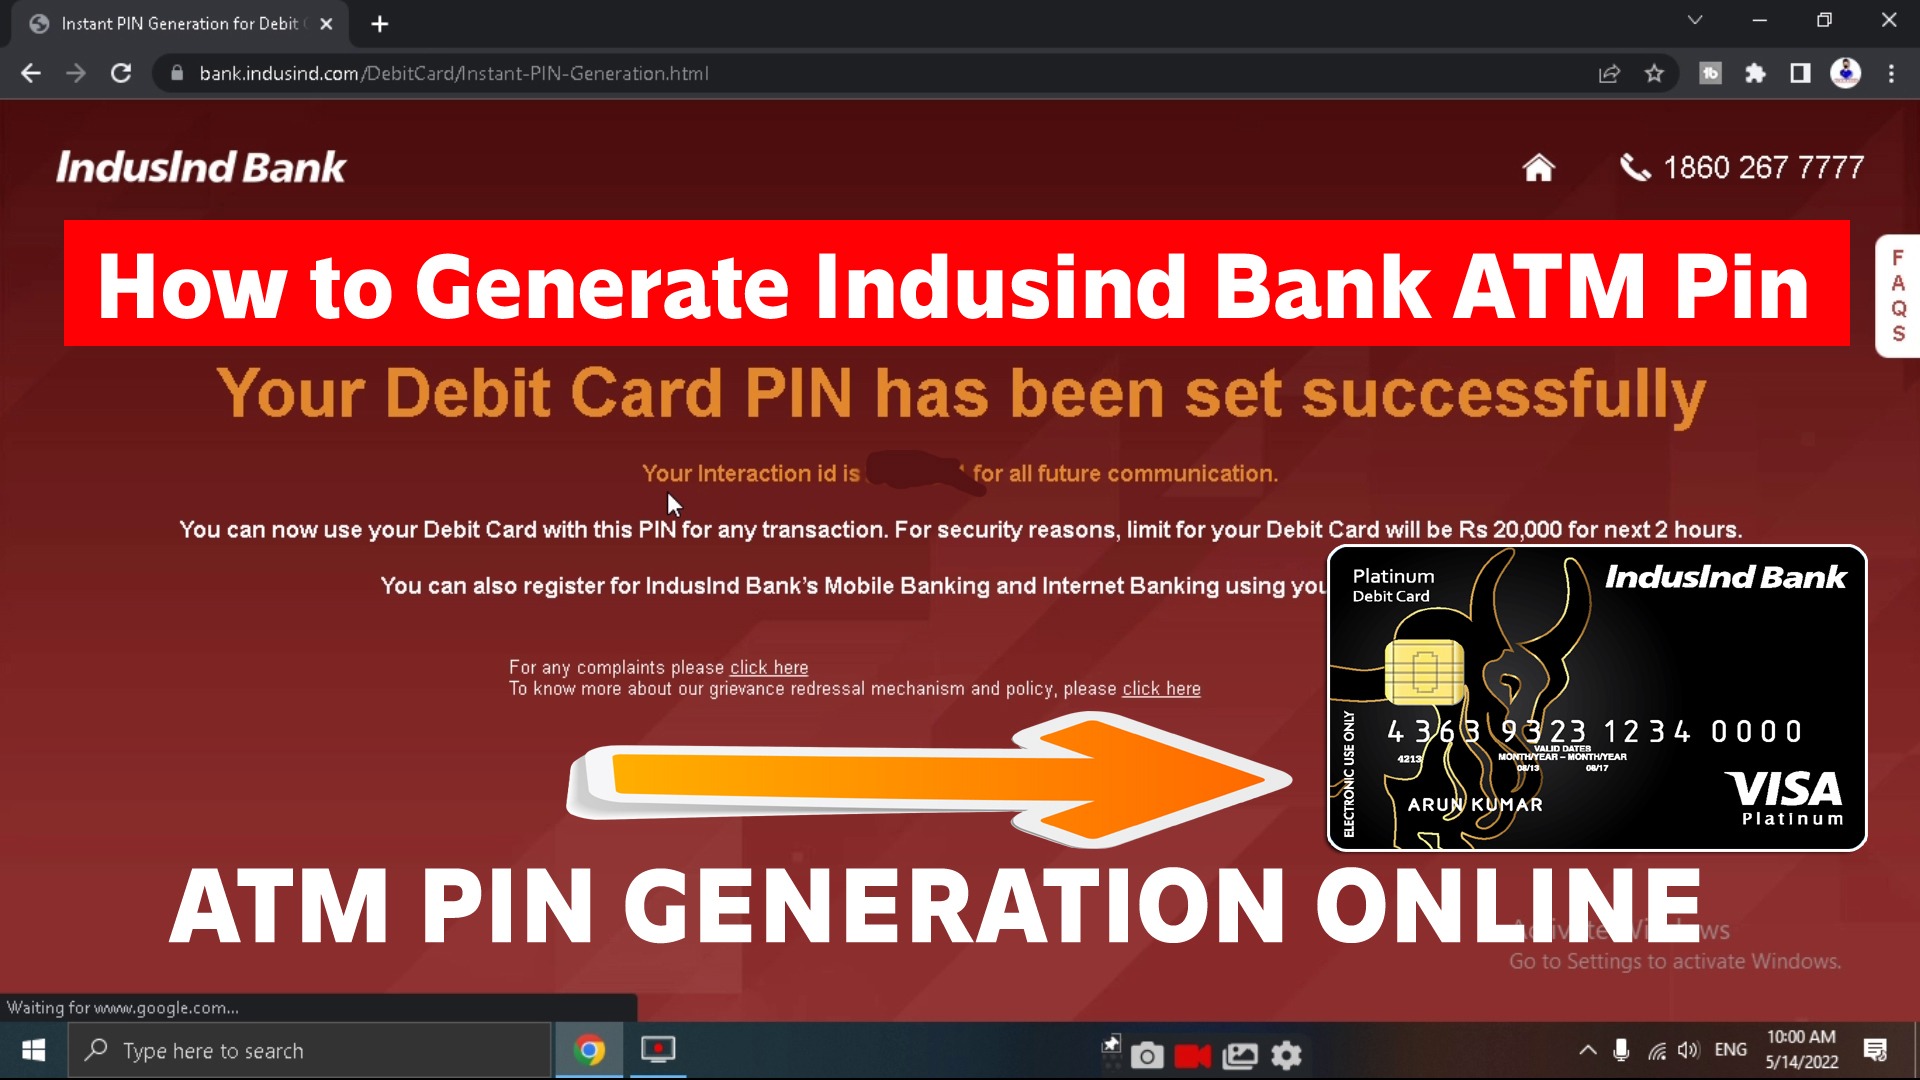 Instant PIN Generation for Debit Card